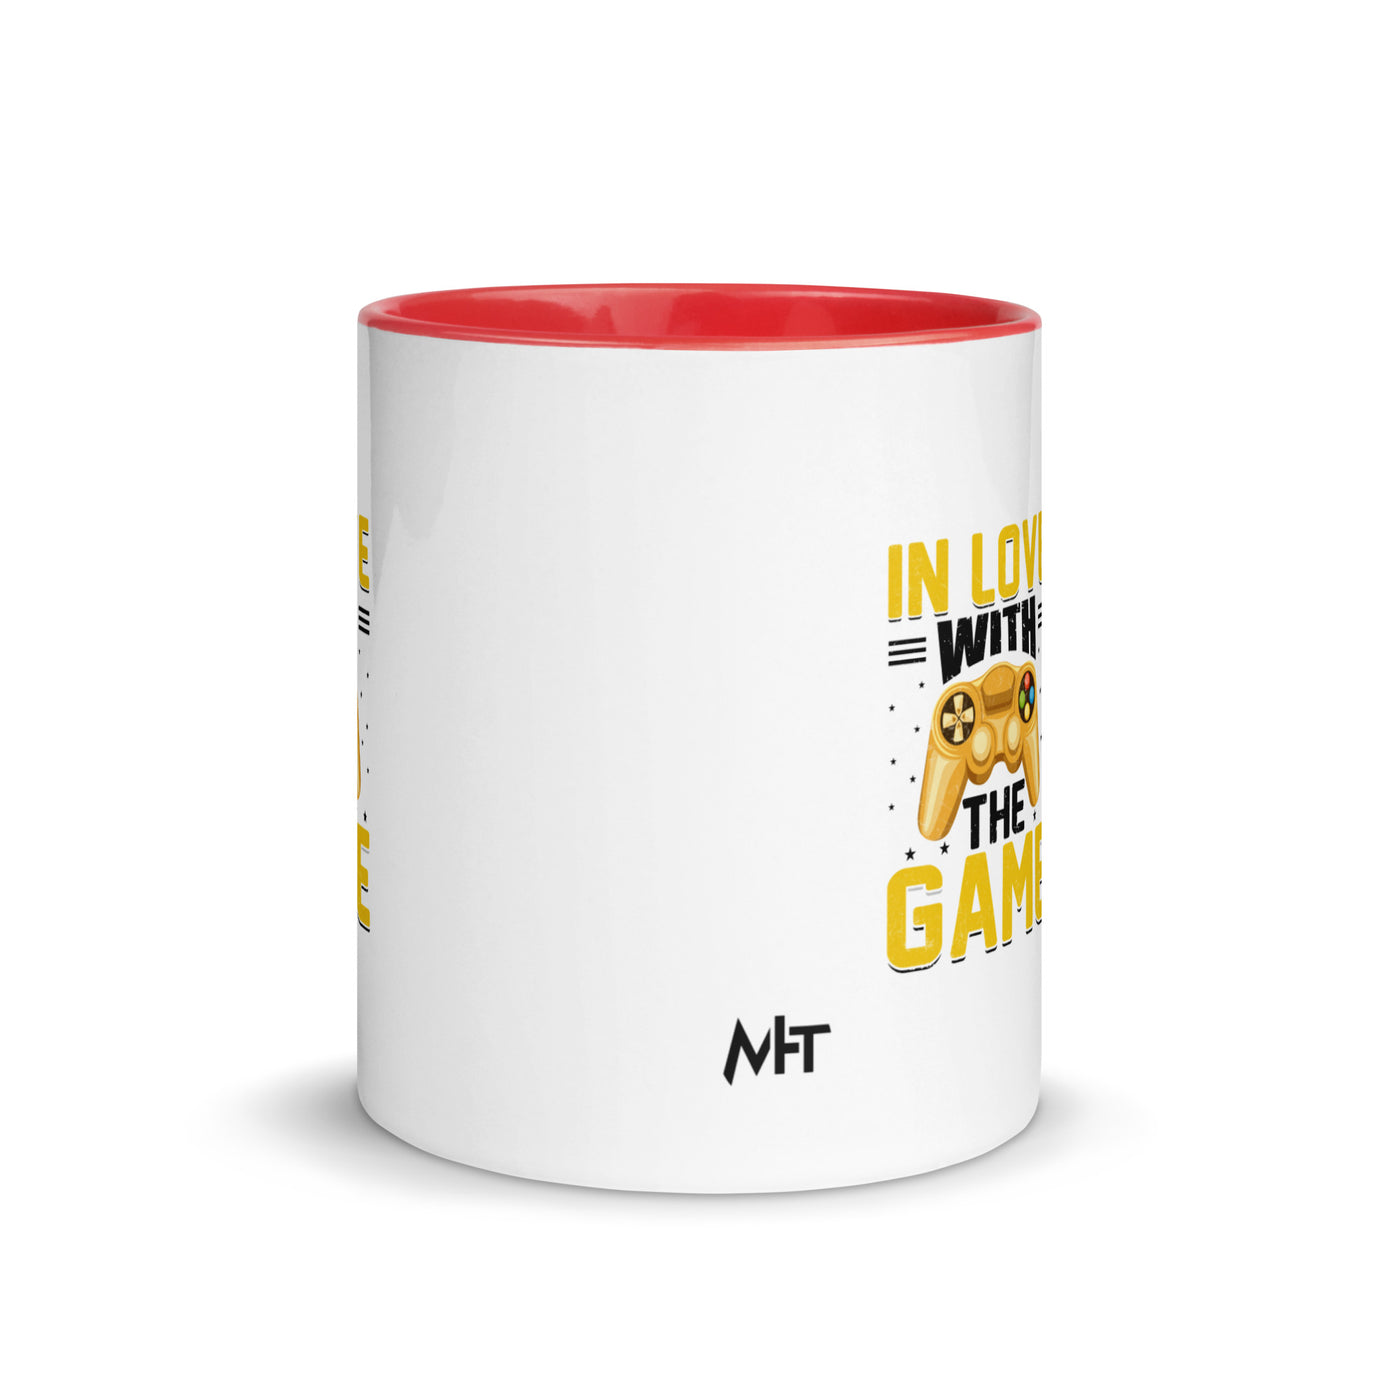 In Love With The Game in Dark Text - Mug with Color Inside